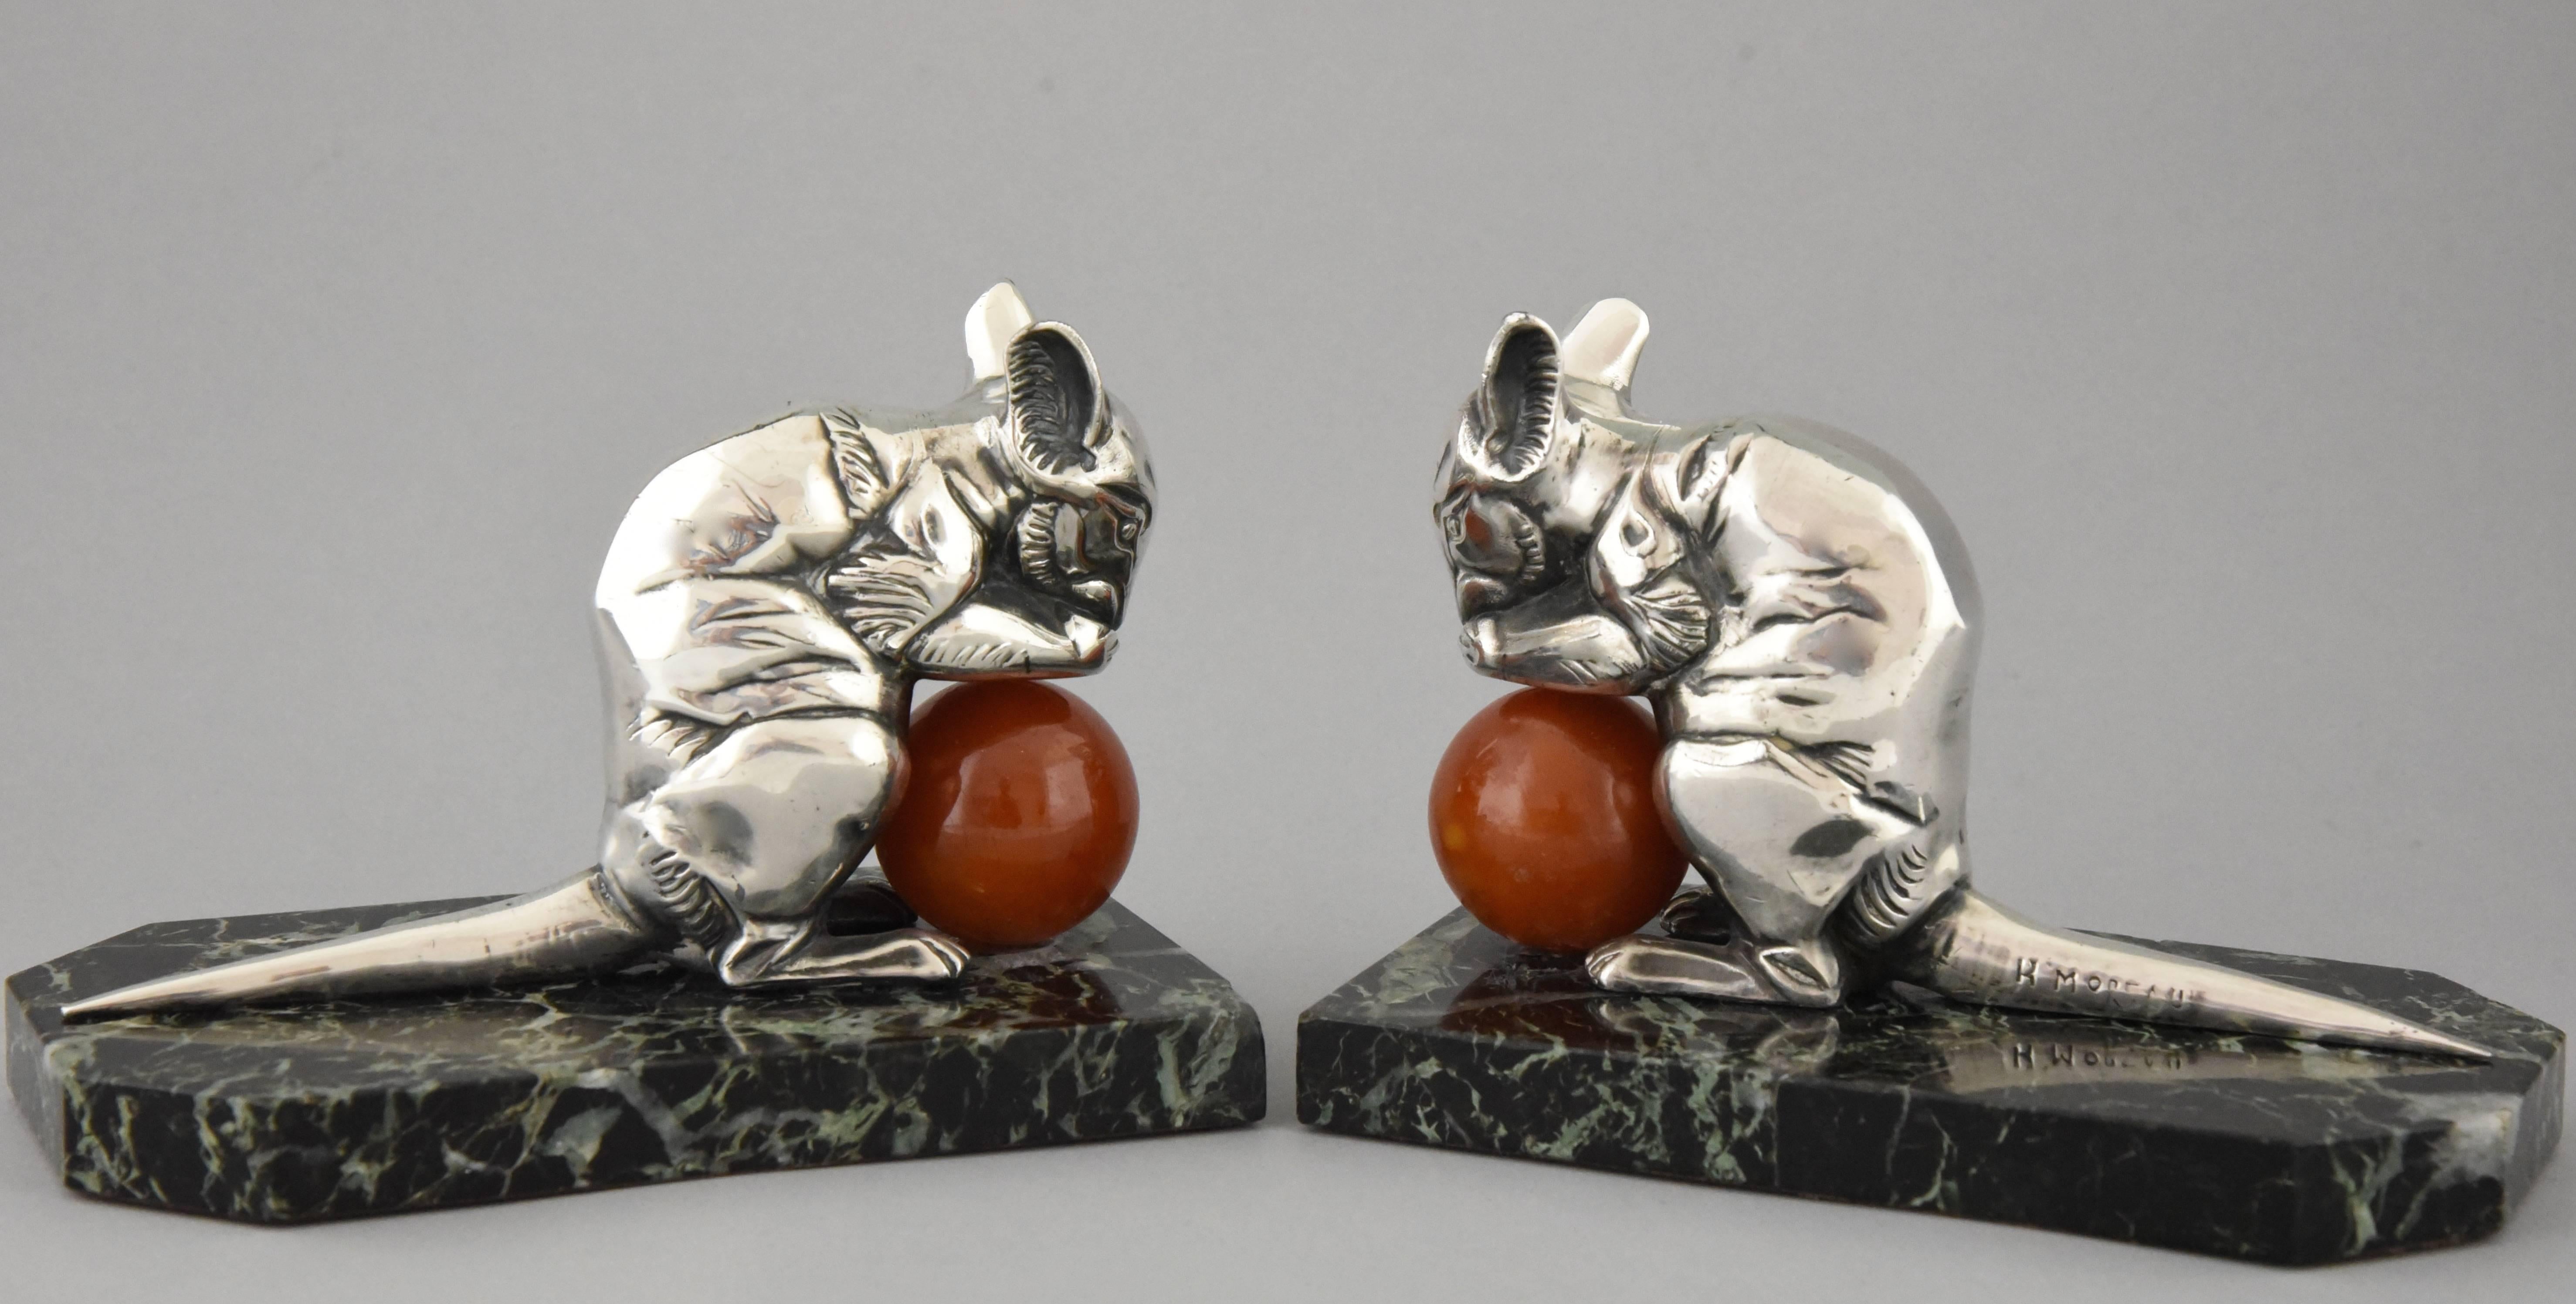 French Art Deco Silvered Mouse Bookends by Hippolyte Moreau, 1930